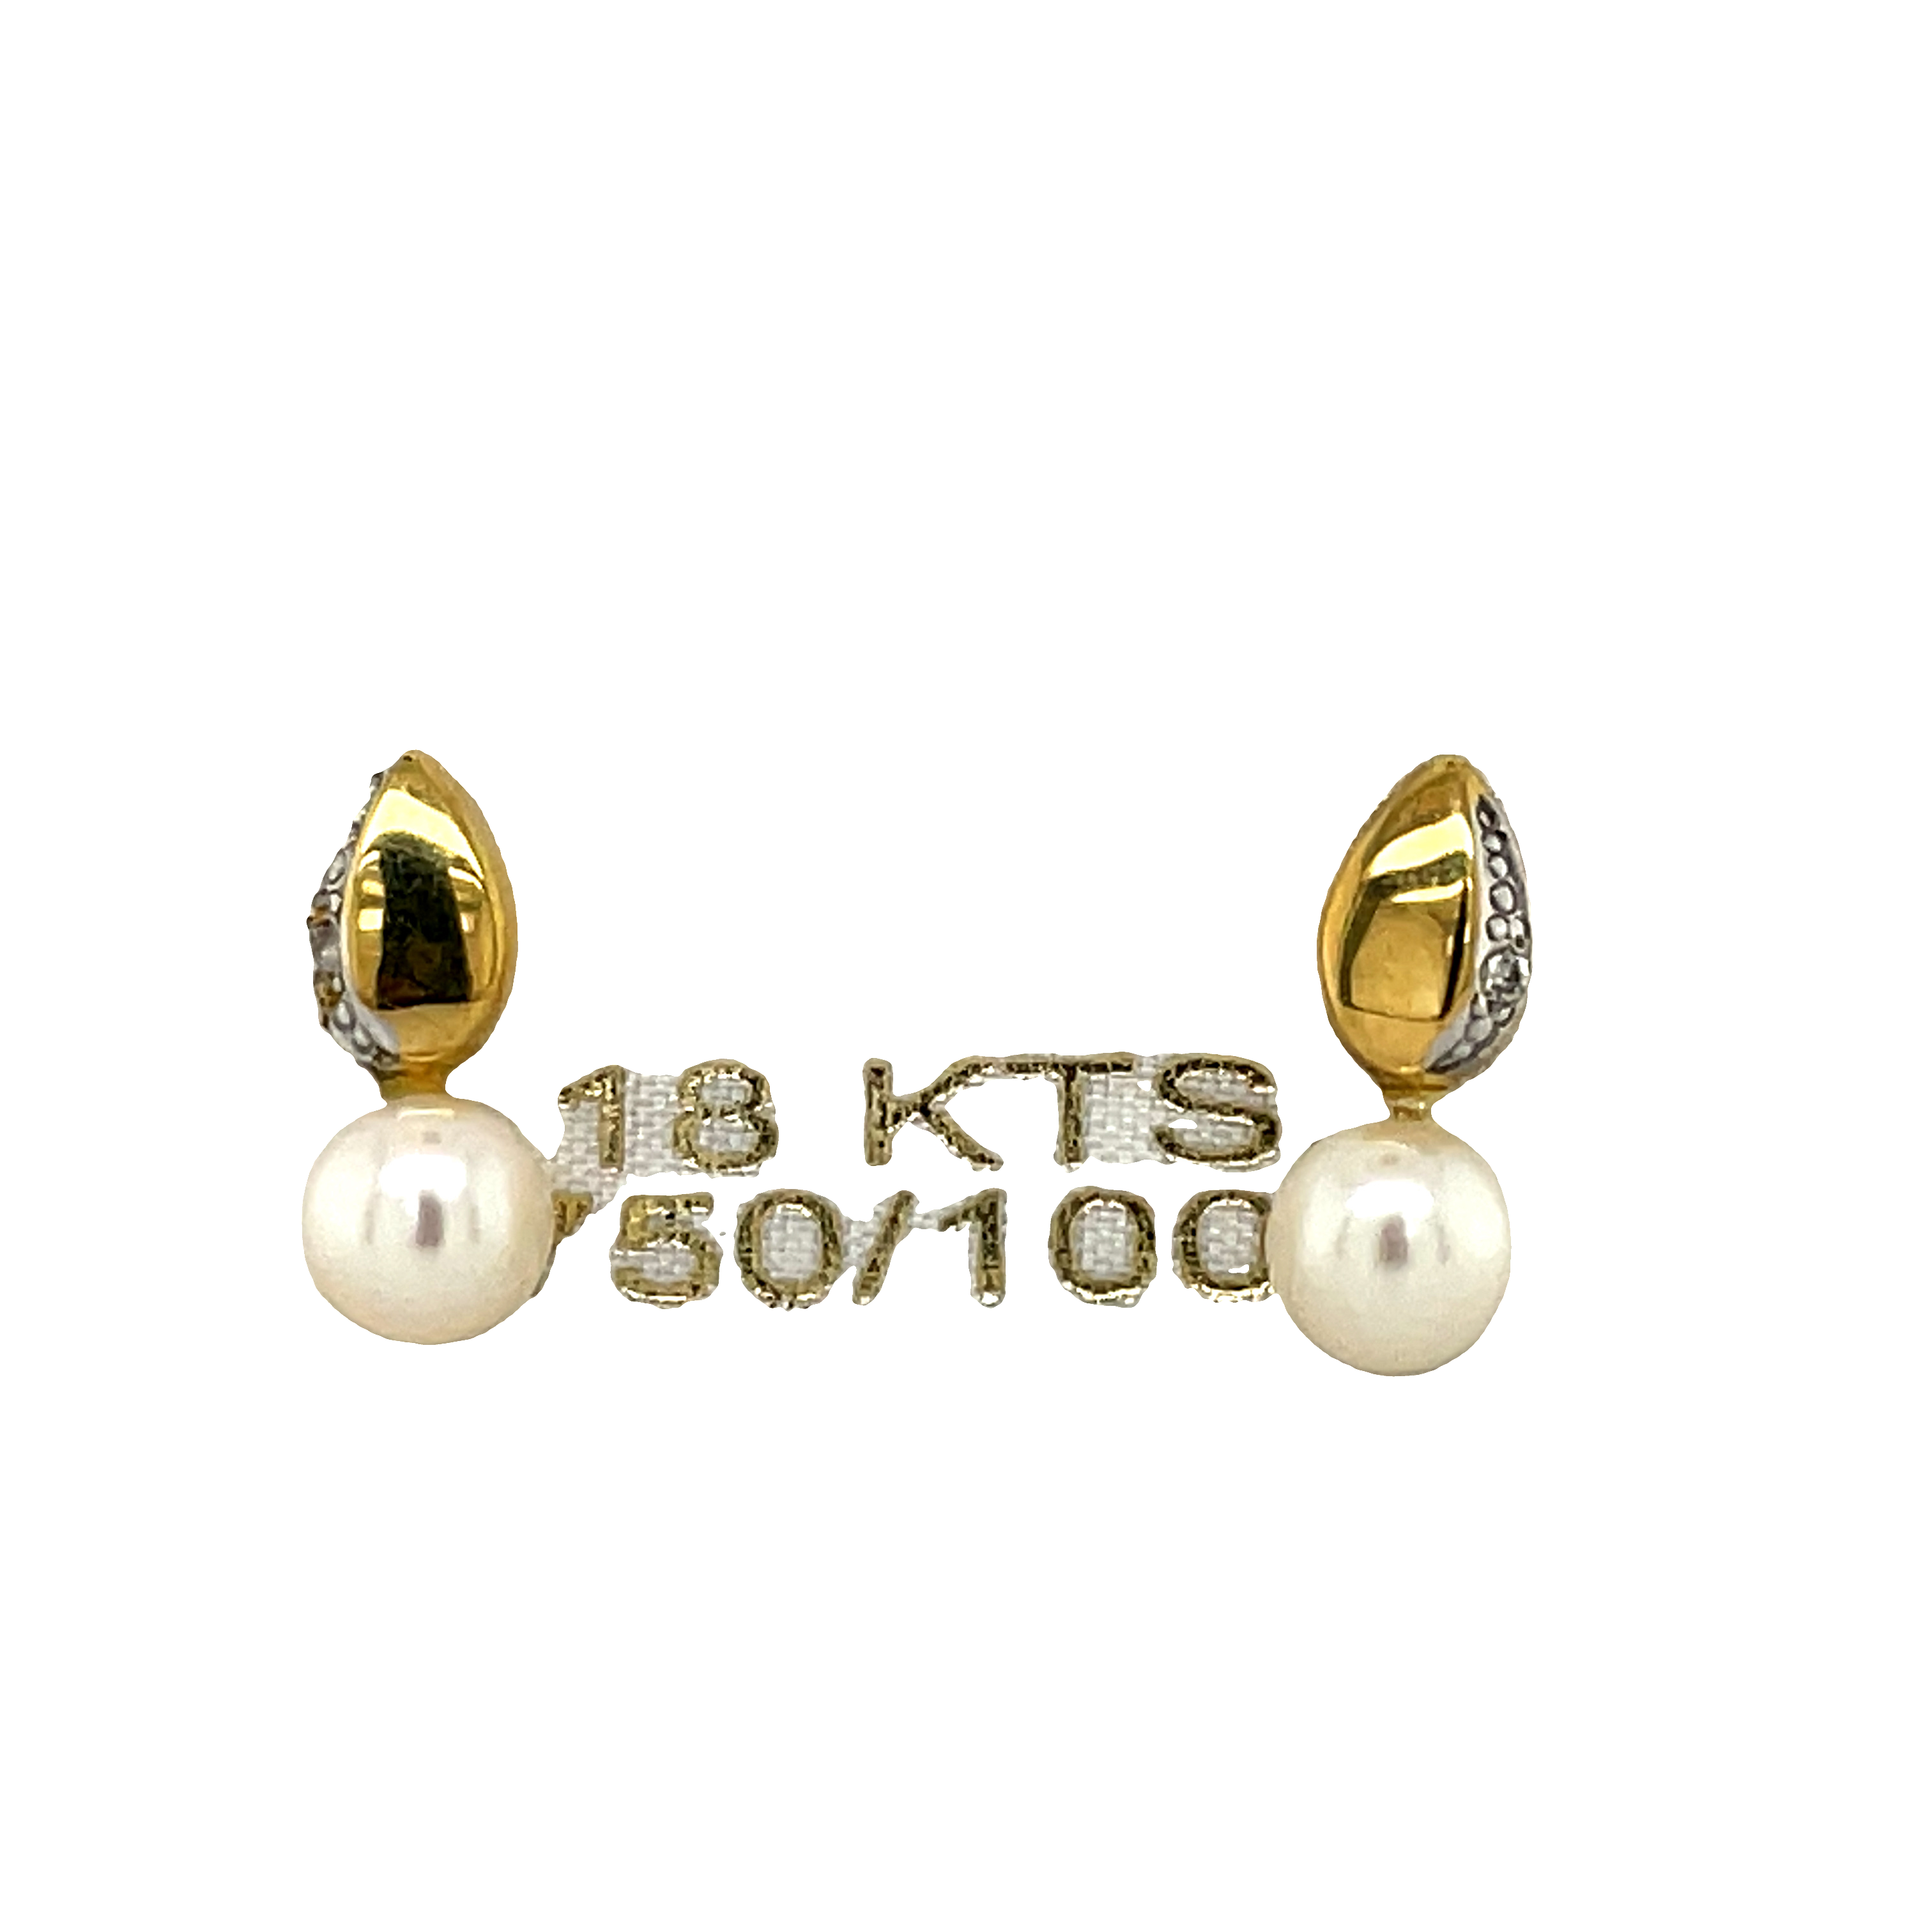 Perfect for a special occasion, these chic and timeless 18K gold earrings feature dazzling small pavé diamonds and elegant pearls. Enjoy the peace of mind knowing your little one's ears are safe, with the secure baby screw backs.